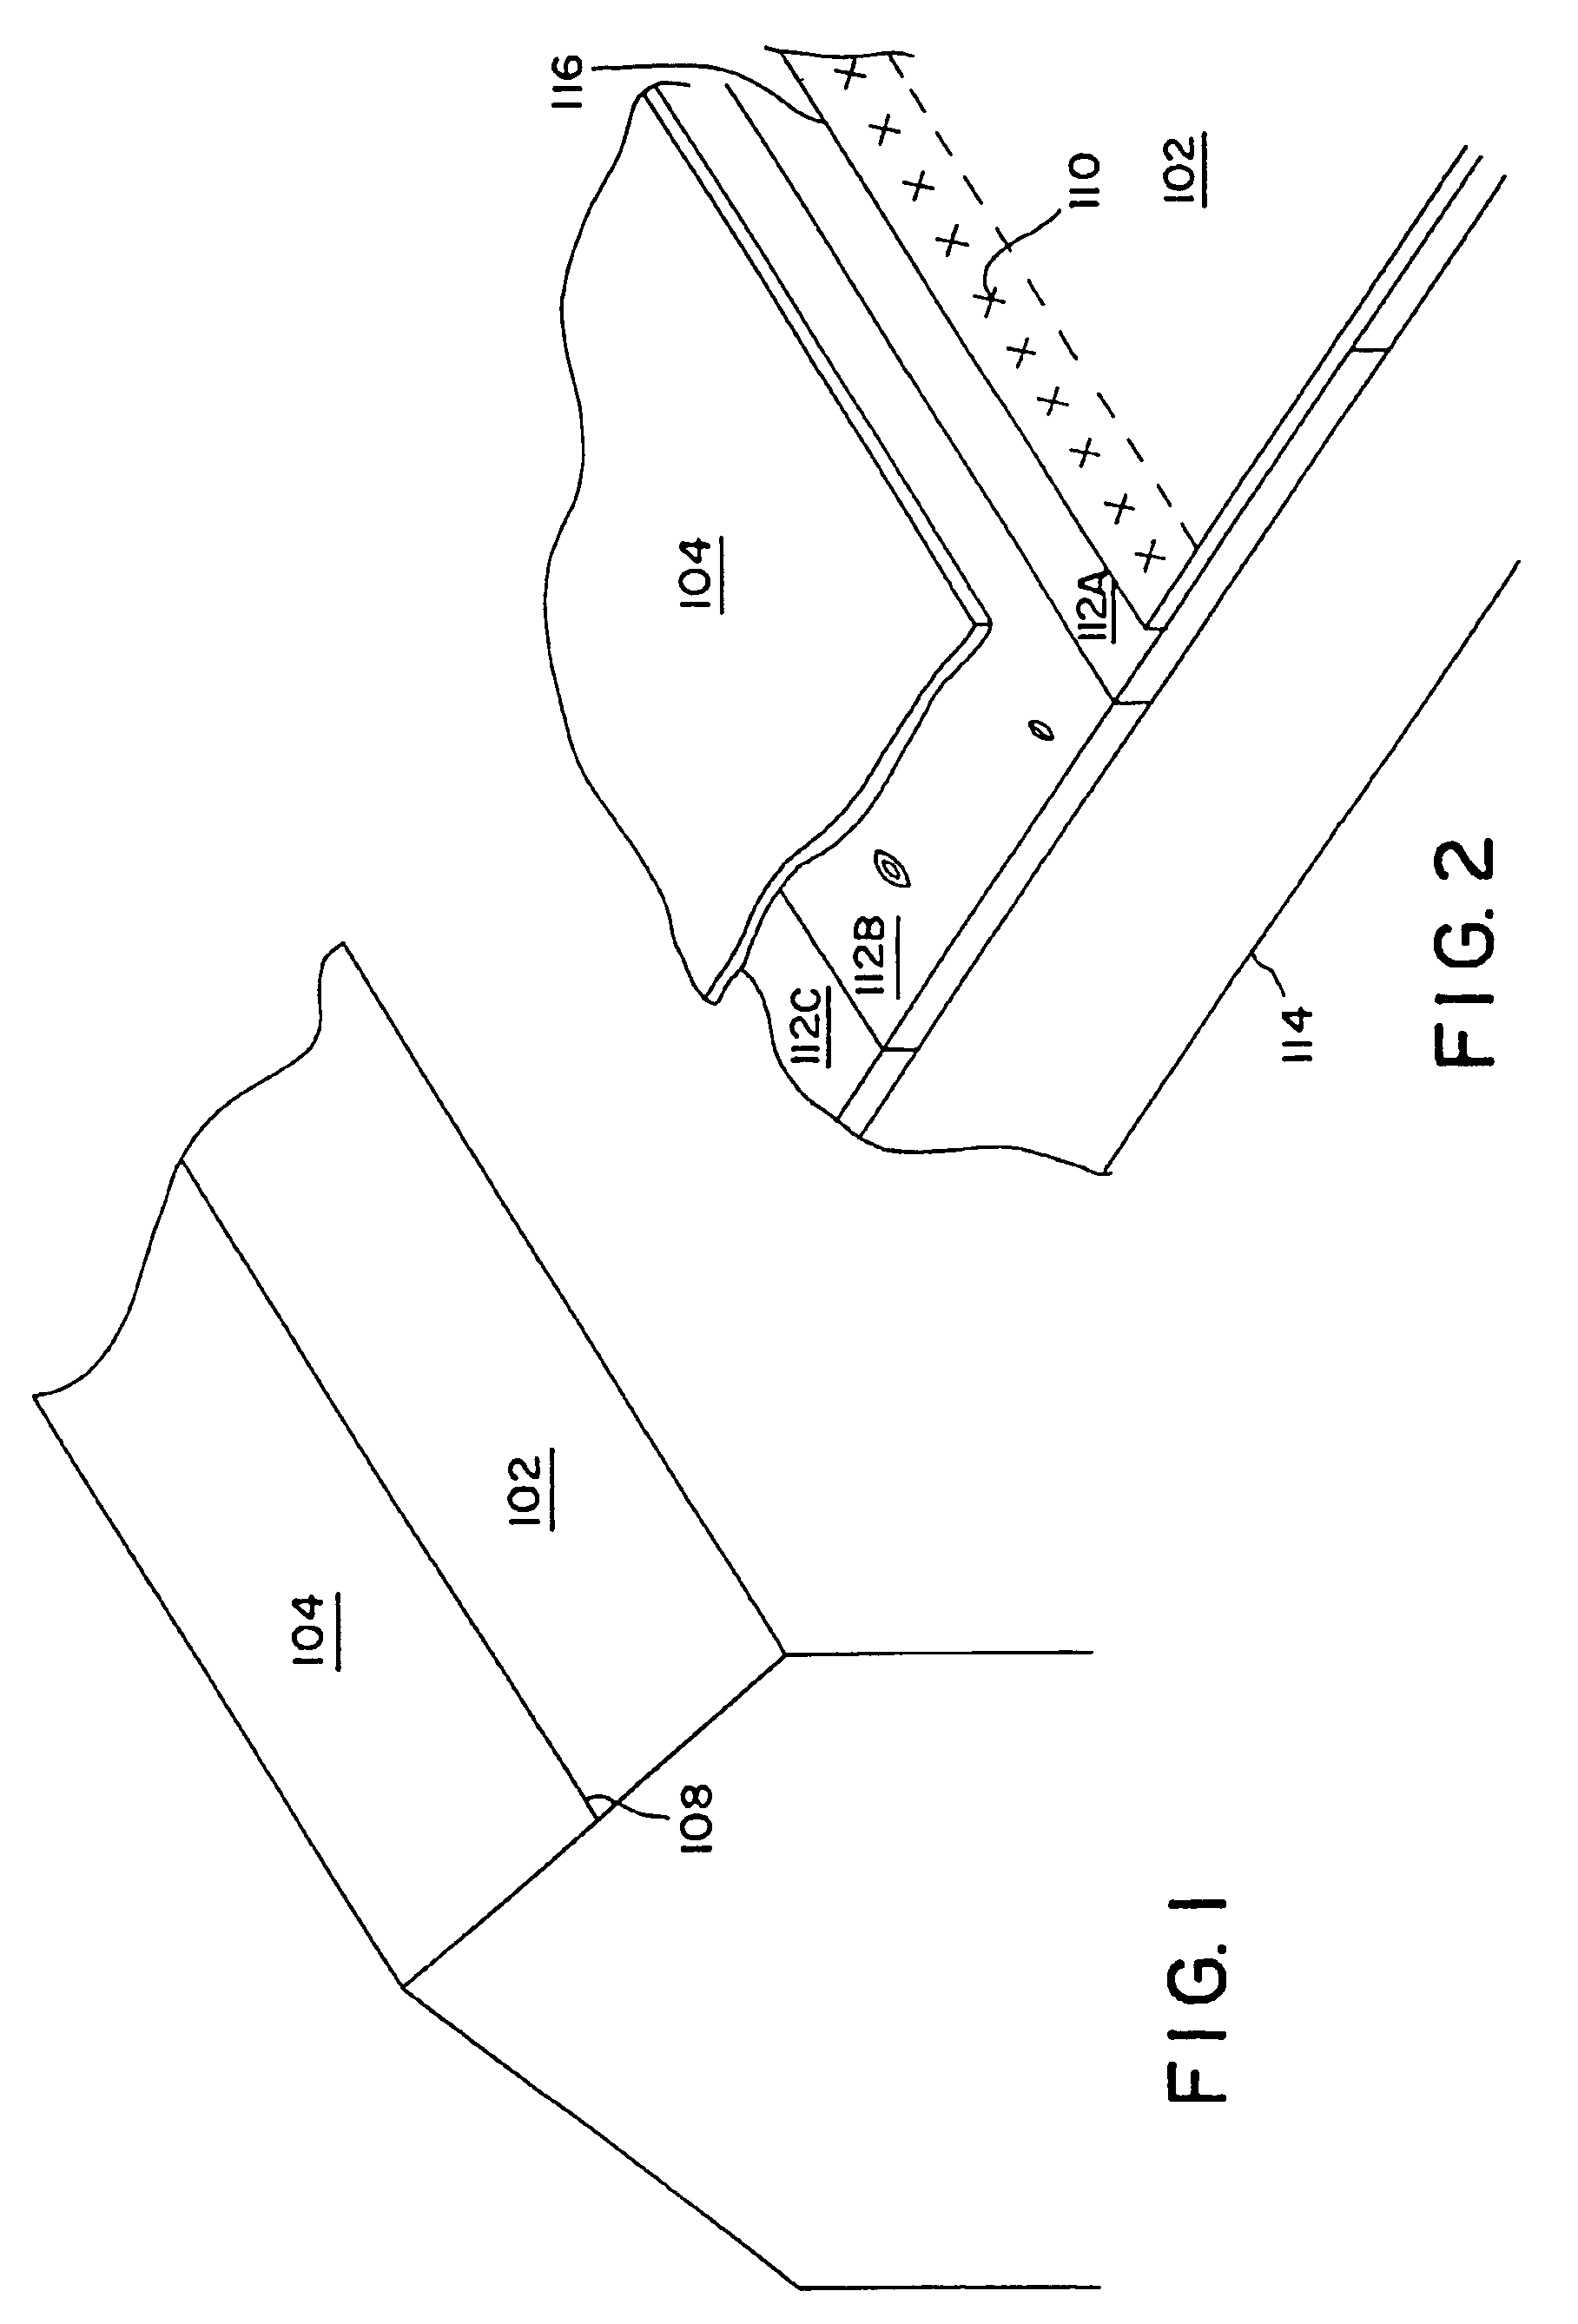 Method and apparatus for coupling structures to roofing